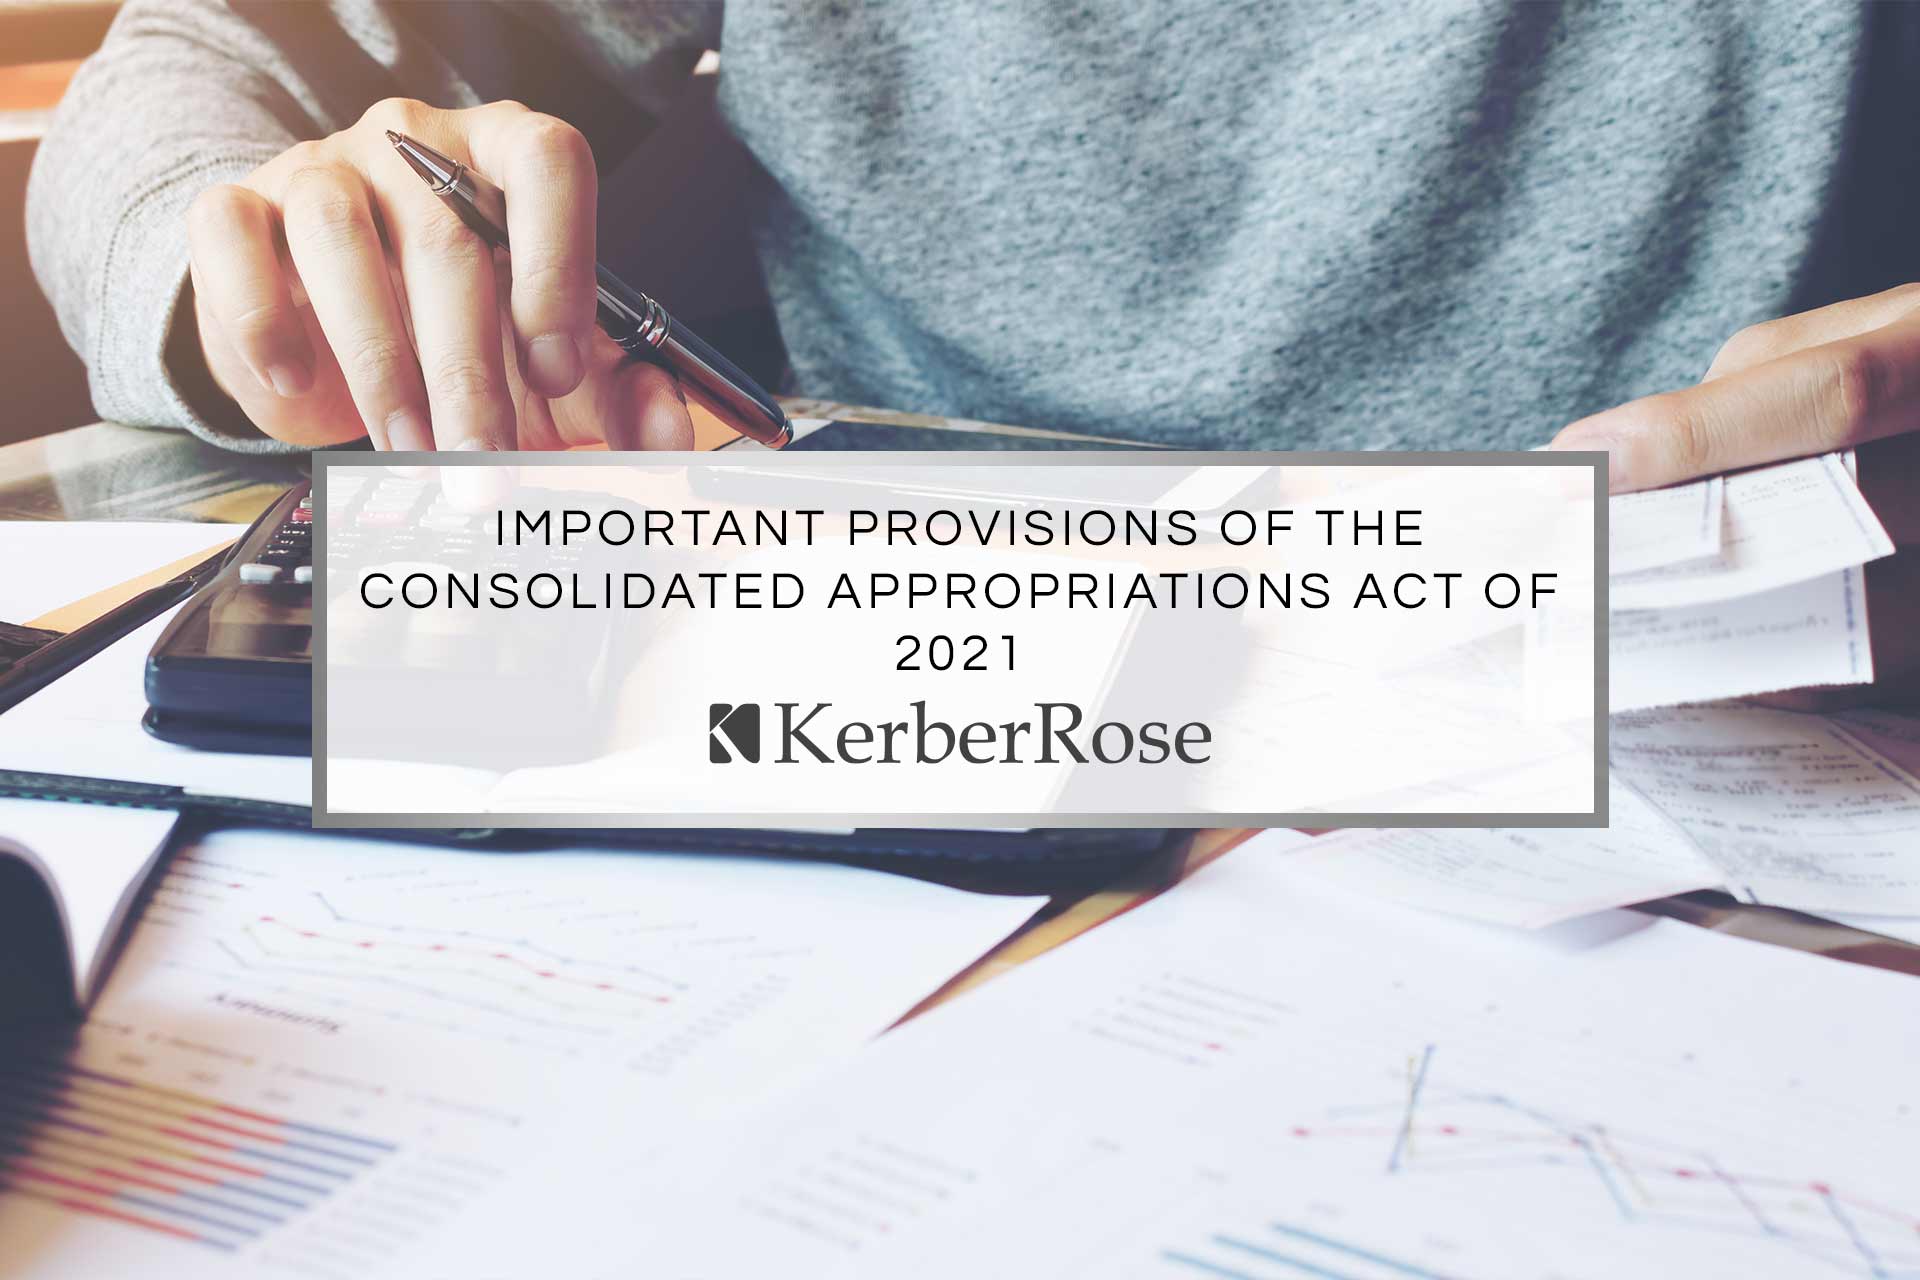 Important Provisions of the Consolidated Appropriations Act of 2021 | KerberRose